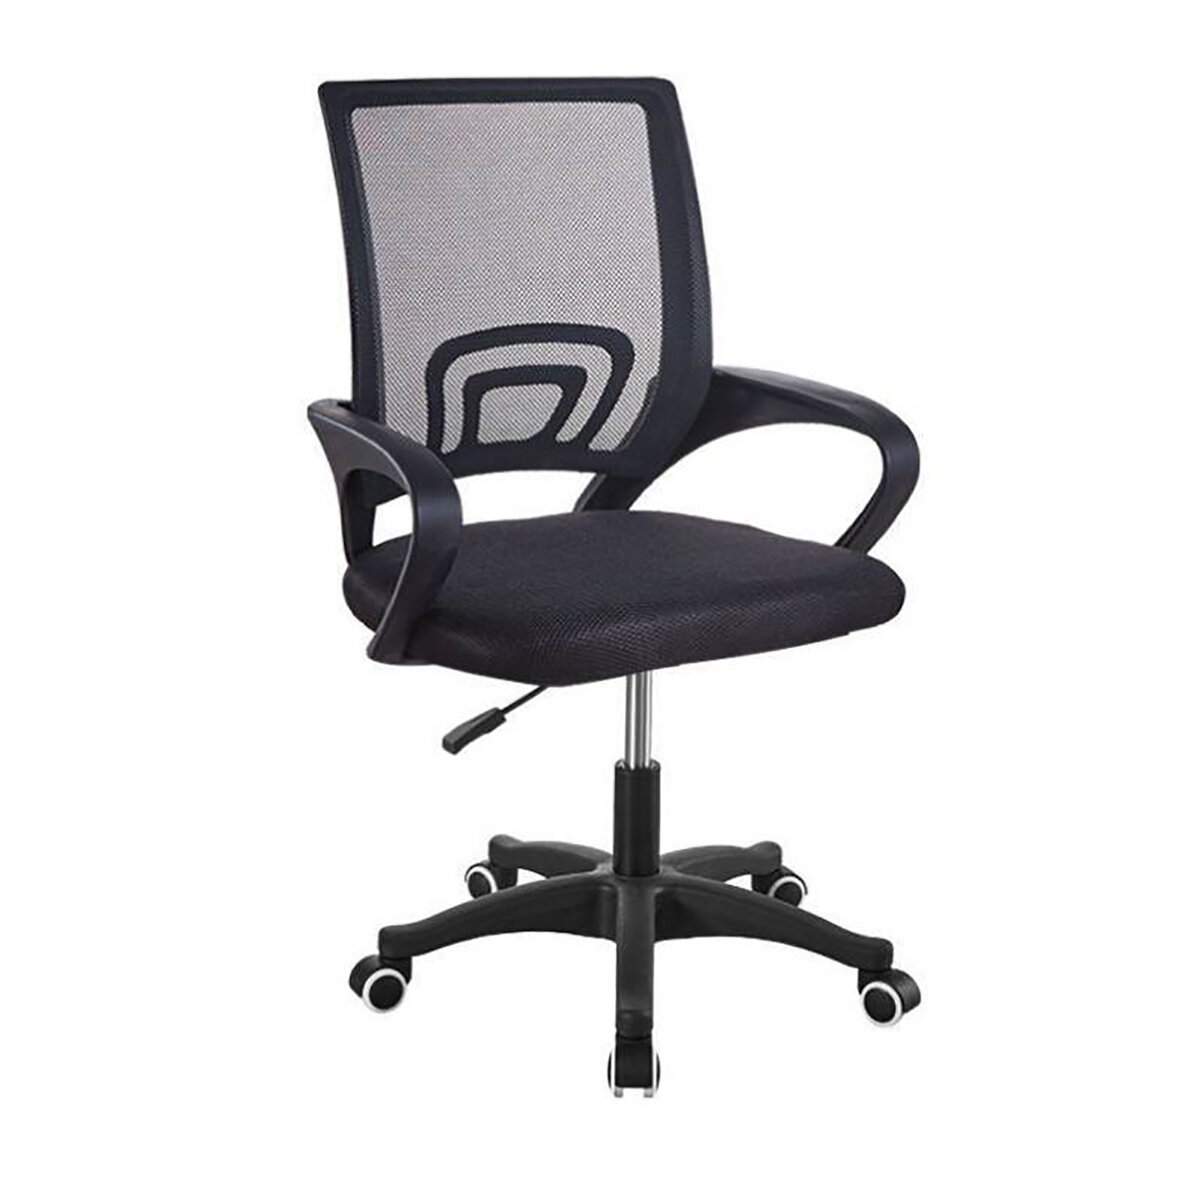 Office Mesh Chair Ergonomic Swivel Mid-back Computer Desk Seat Nylon Base Adjustable Lifting Chair Home Office Furniture